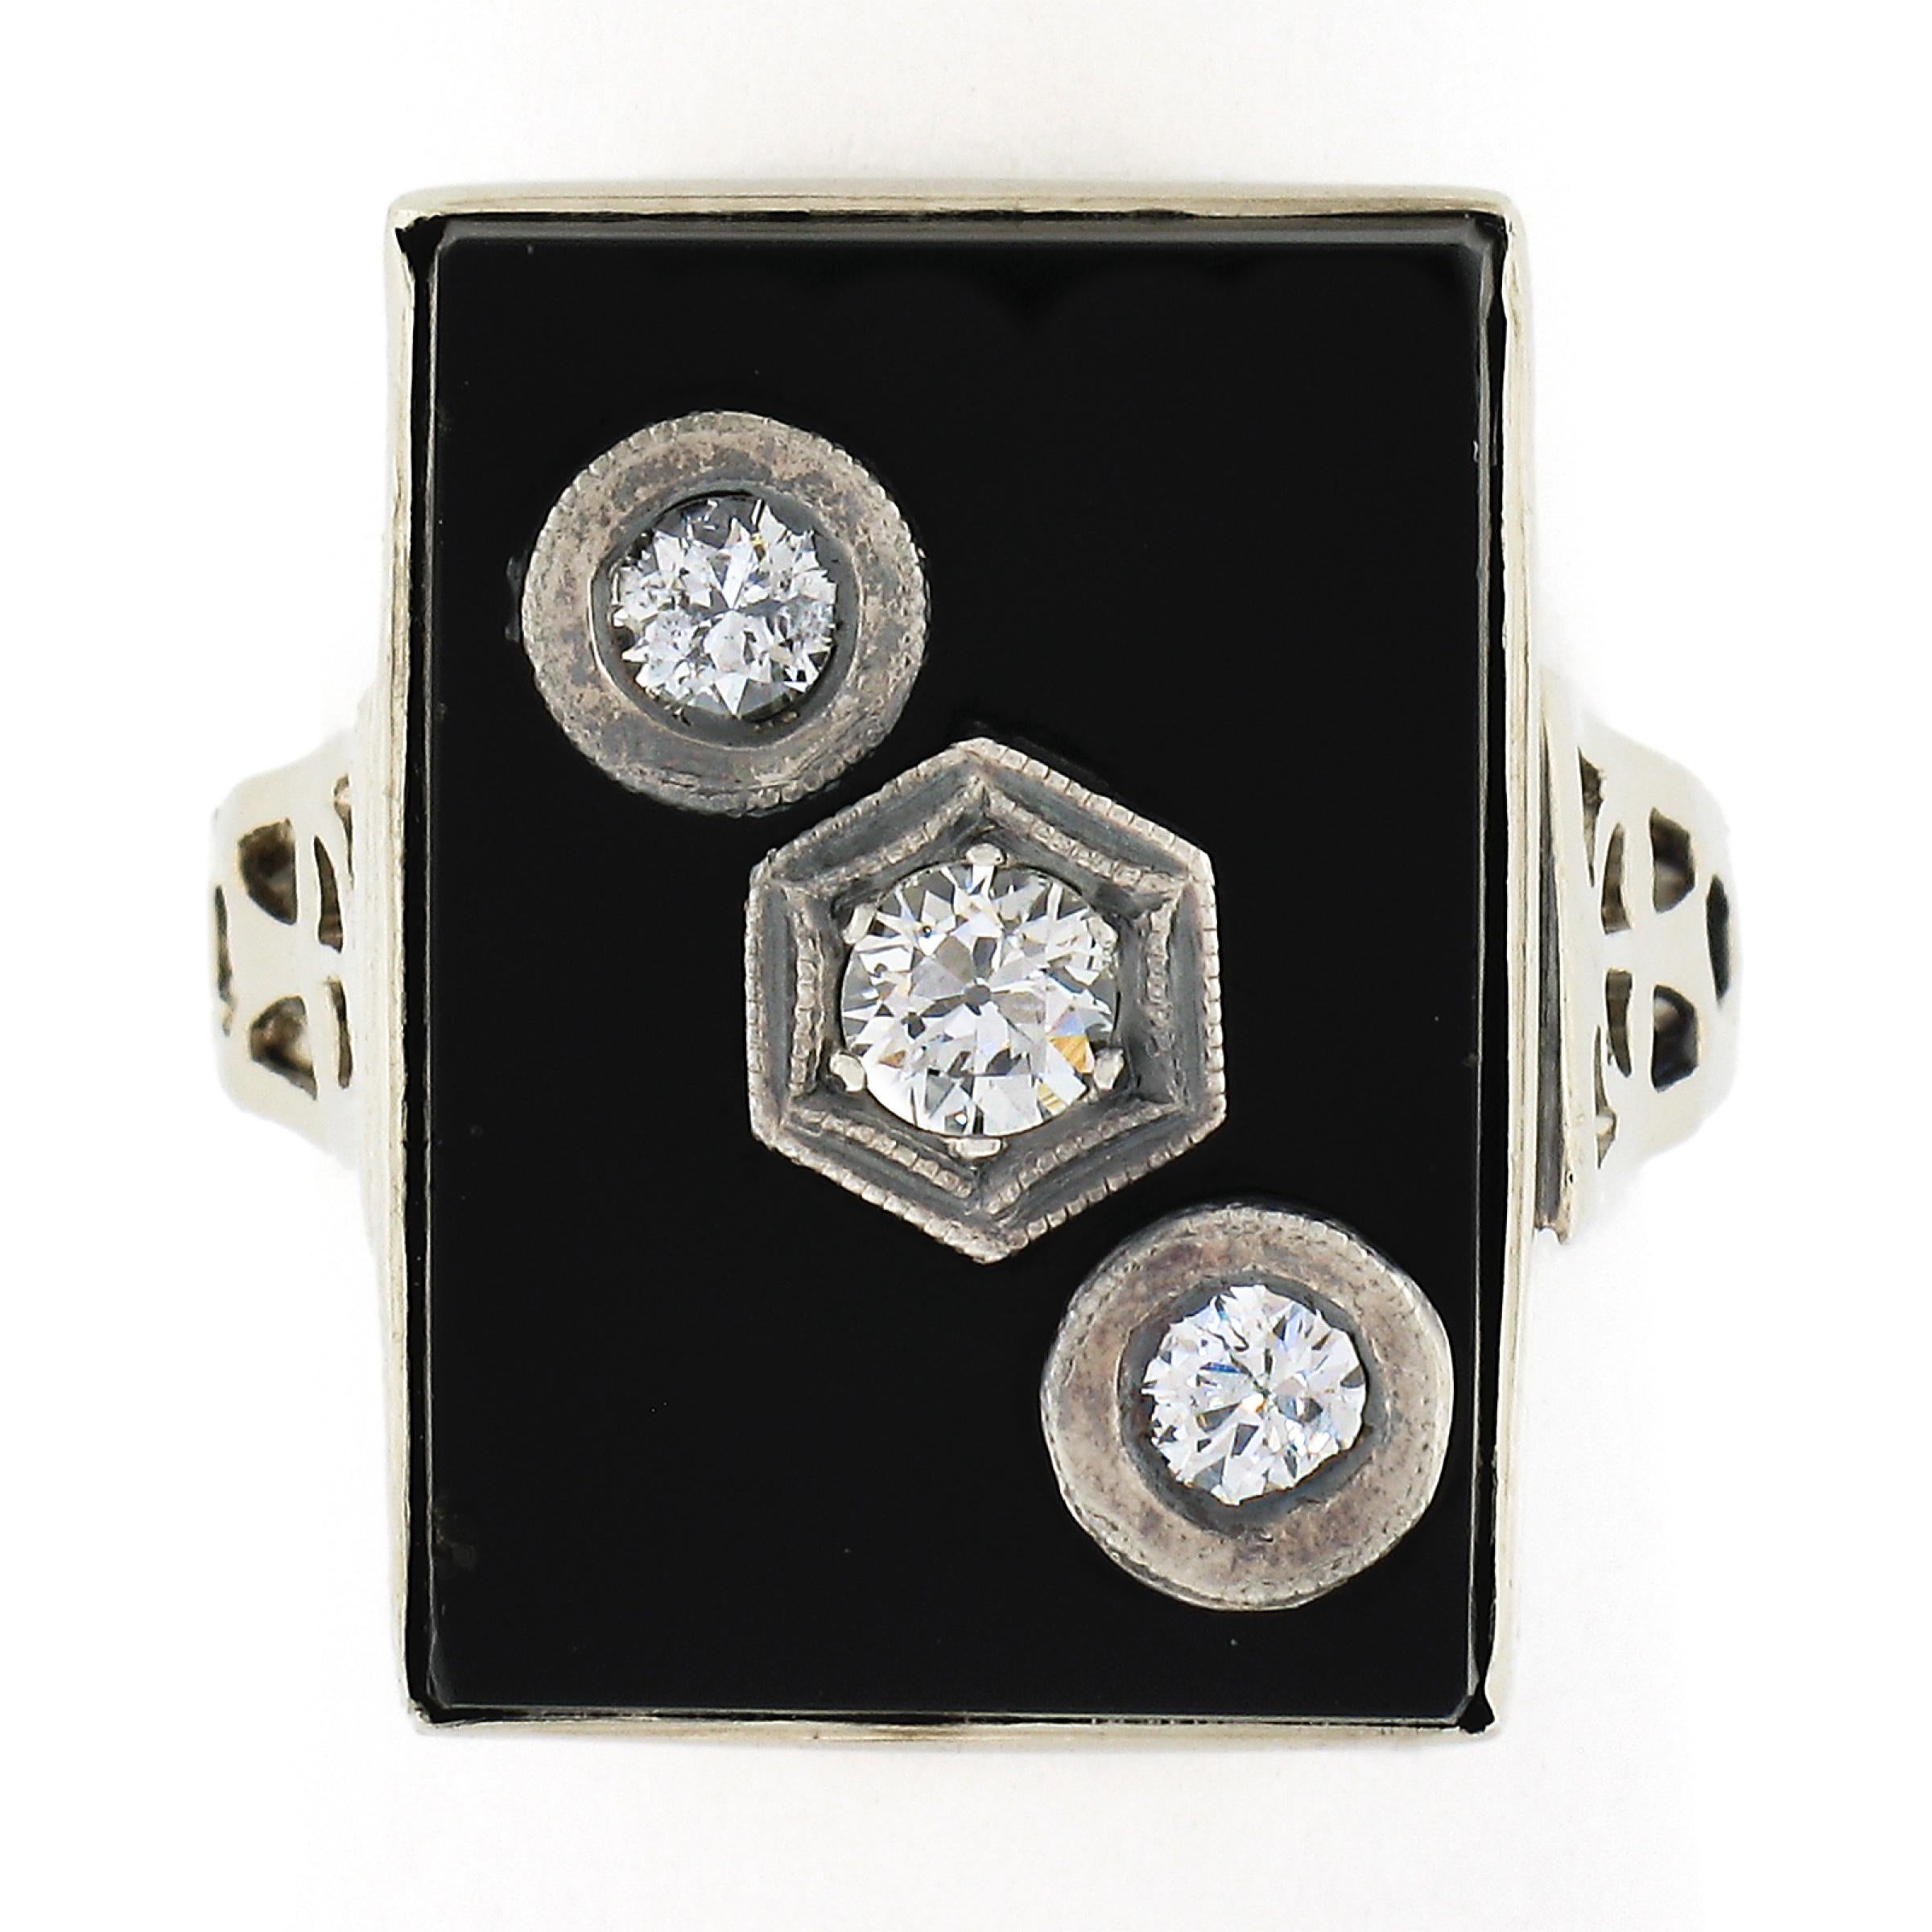 This outstanding vintage ring was crafted in solid 10k white gold and features a large, polished, rectangular cut black onyx stone adorned with 3 old cut diamonds neatly and individually set at a diagonal across its top. The fine onyx gemstone has a